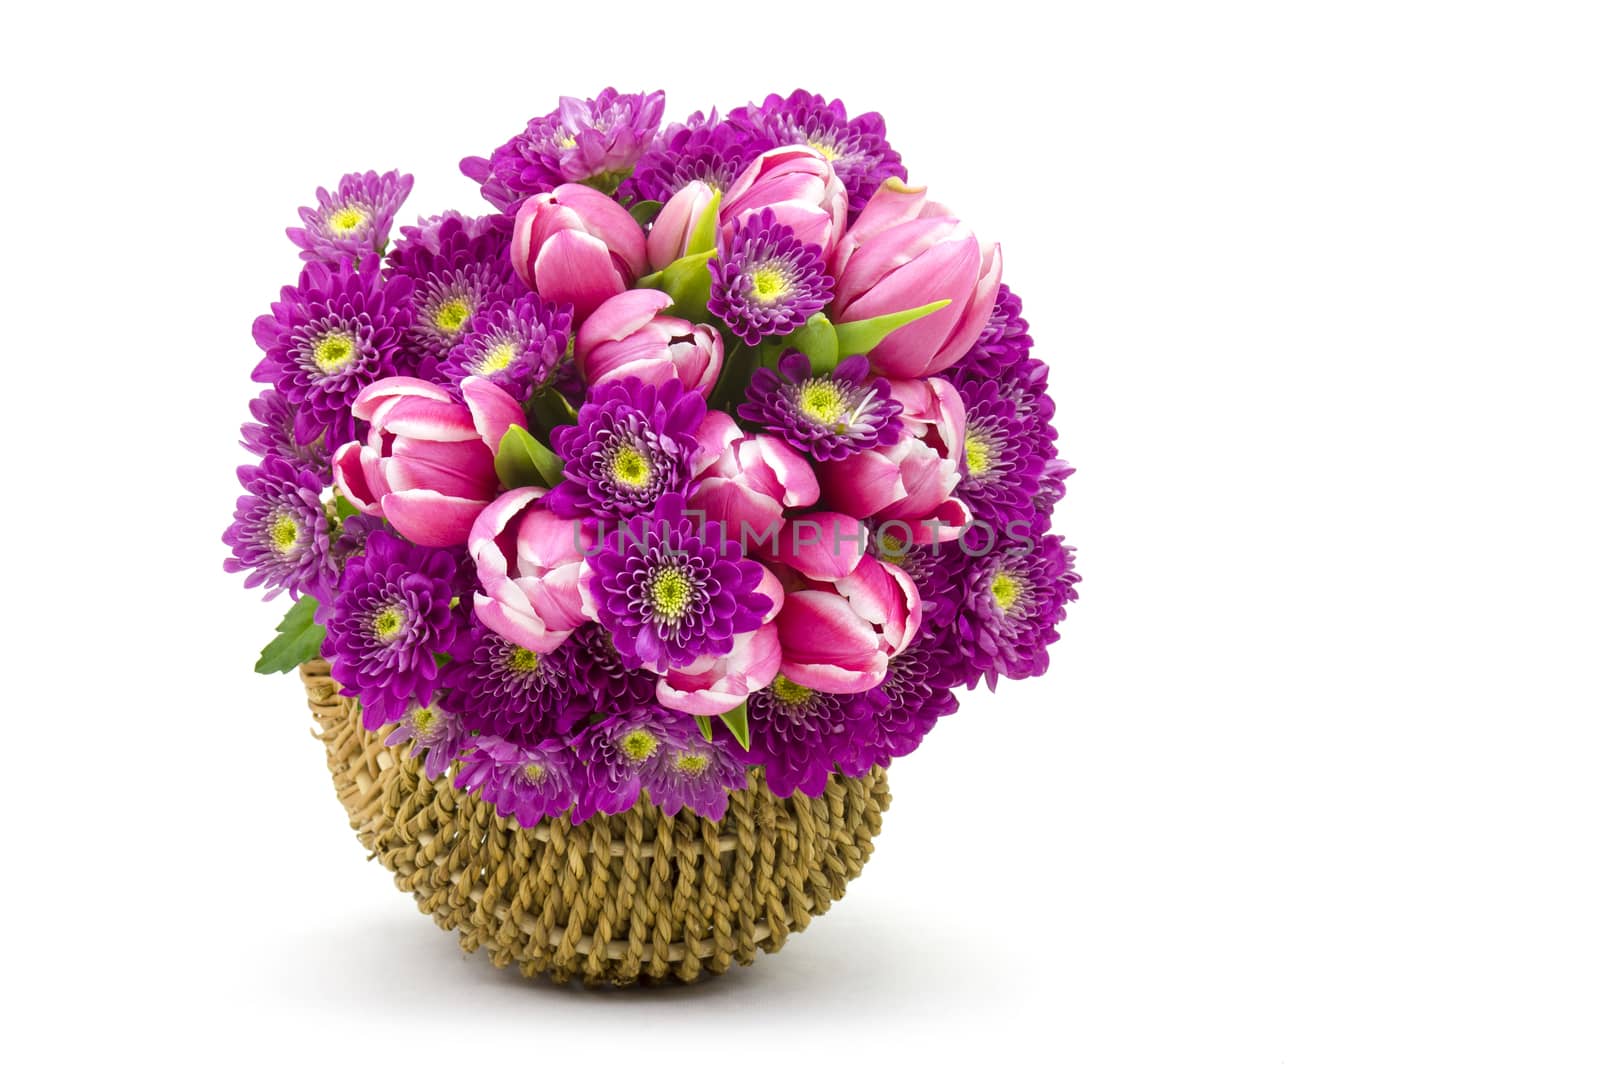 Bouquet made of tulips and chrysanthemum flowers by miradrozdowski